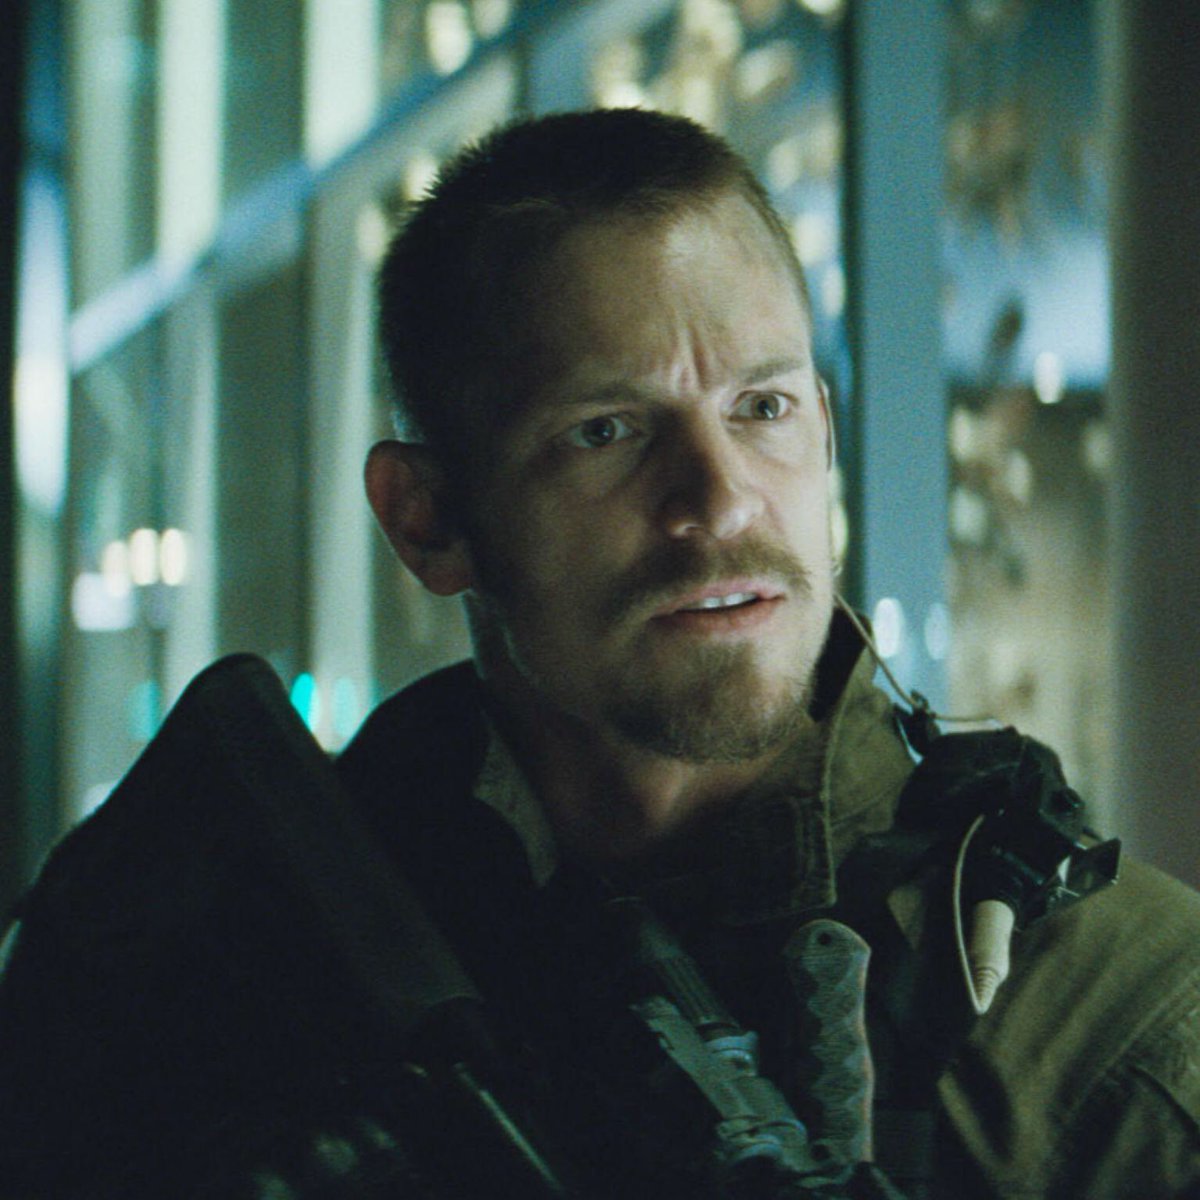 Both Tom Hardy and Jake Gyllenhaal were offered the role of Rick Flag in Suicide Squad, a role that ultimately went to Joel Kinnaman in the end. Hardy dropped out due to scheduling conflicts while Gyllenhaal was simply not interested.